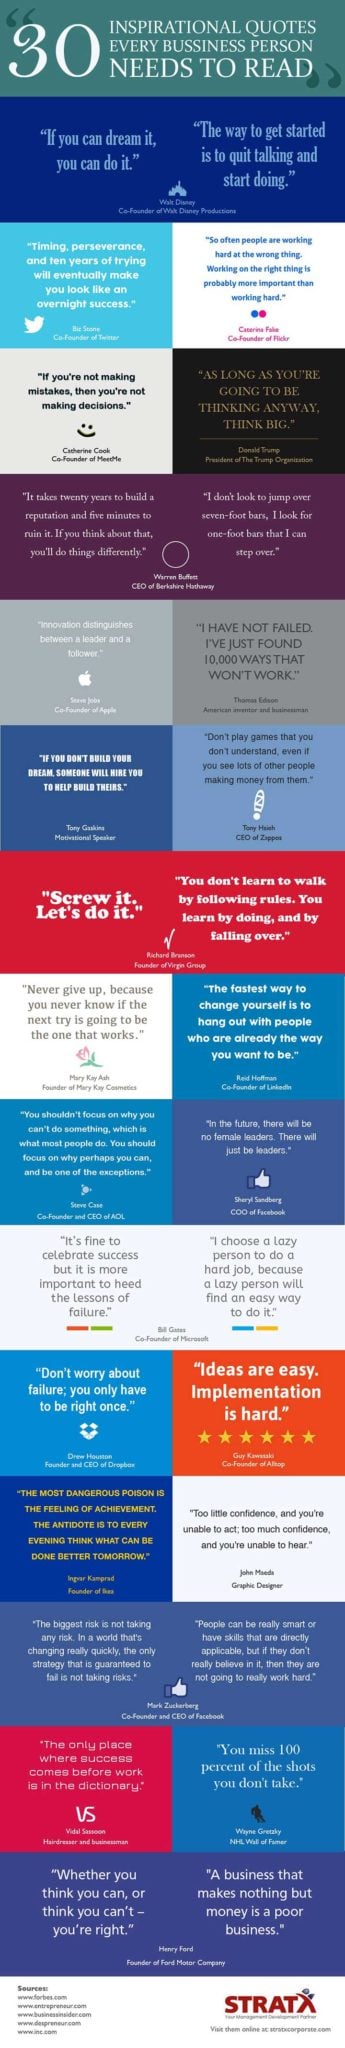 30-inspirational-quotes